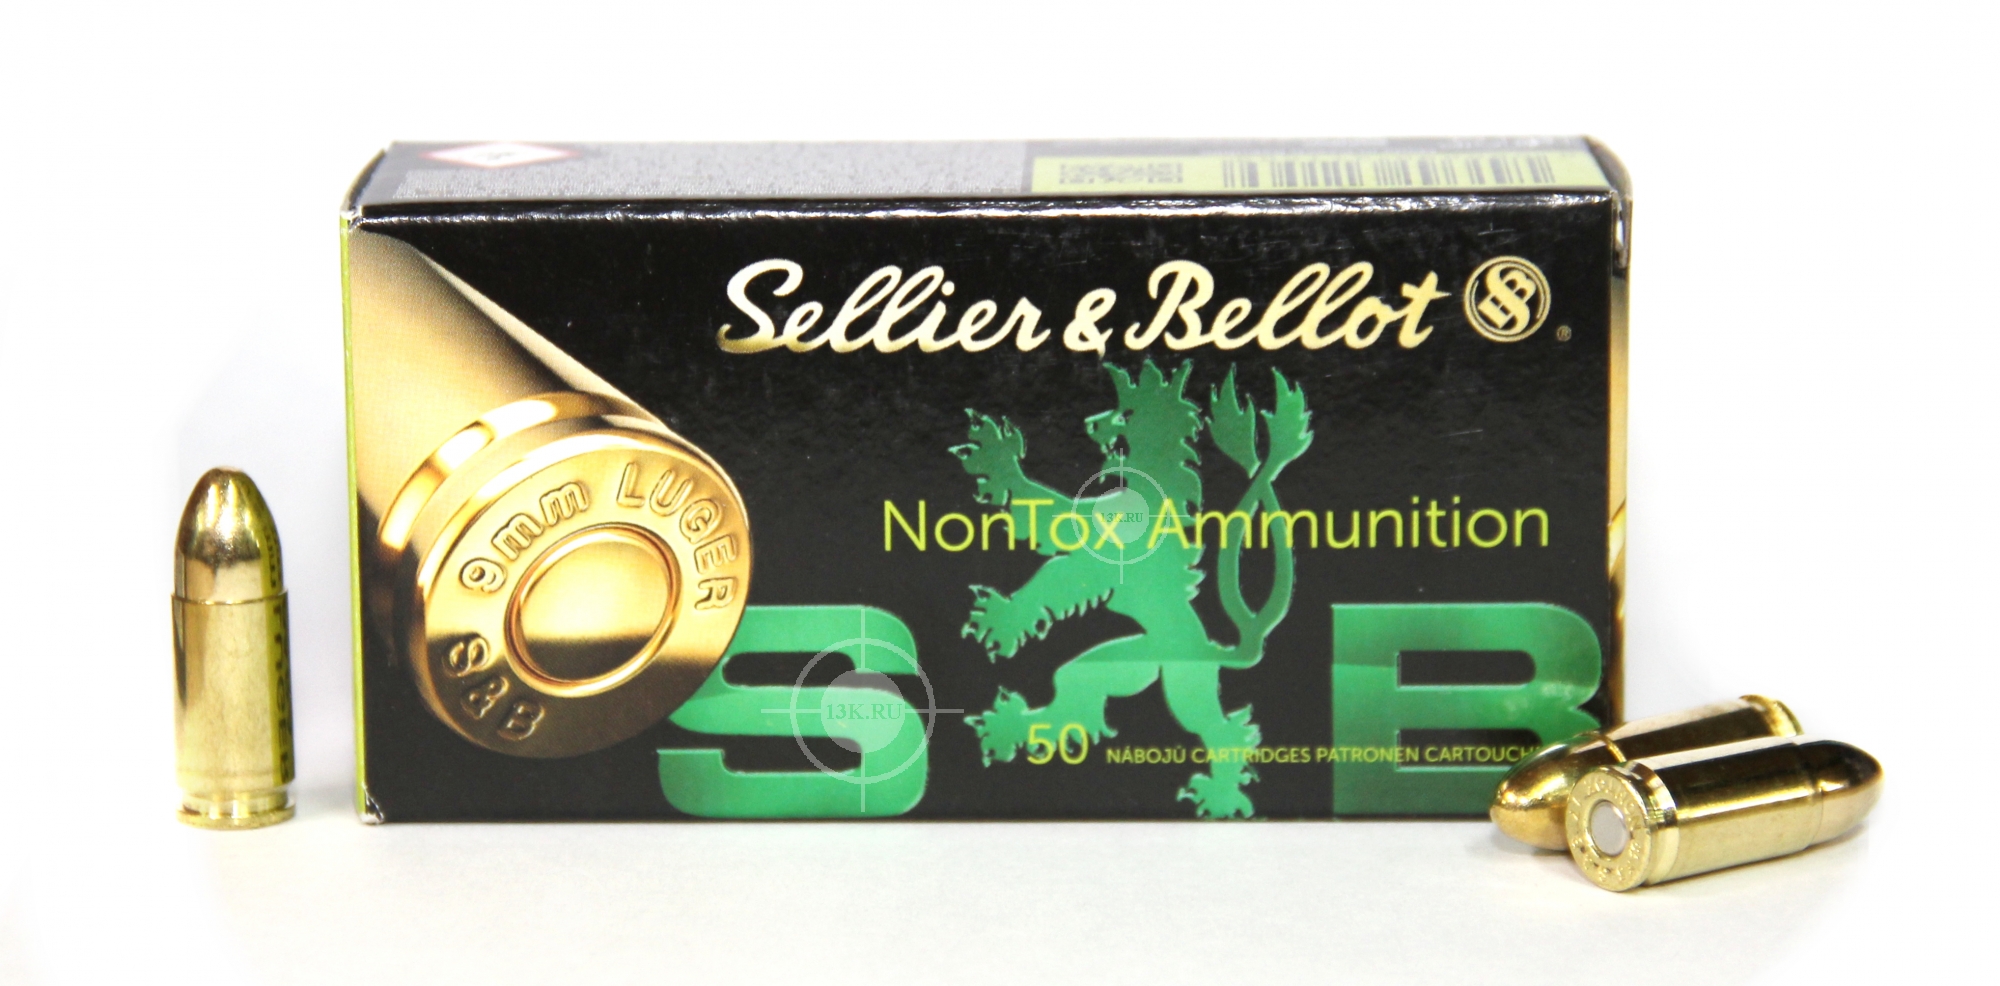 Sellier&Bellot 9mm Luger TFMJ MONTOX, 8гр (50шт). 